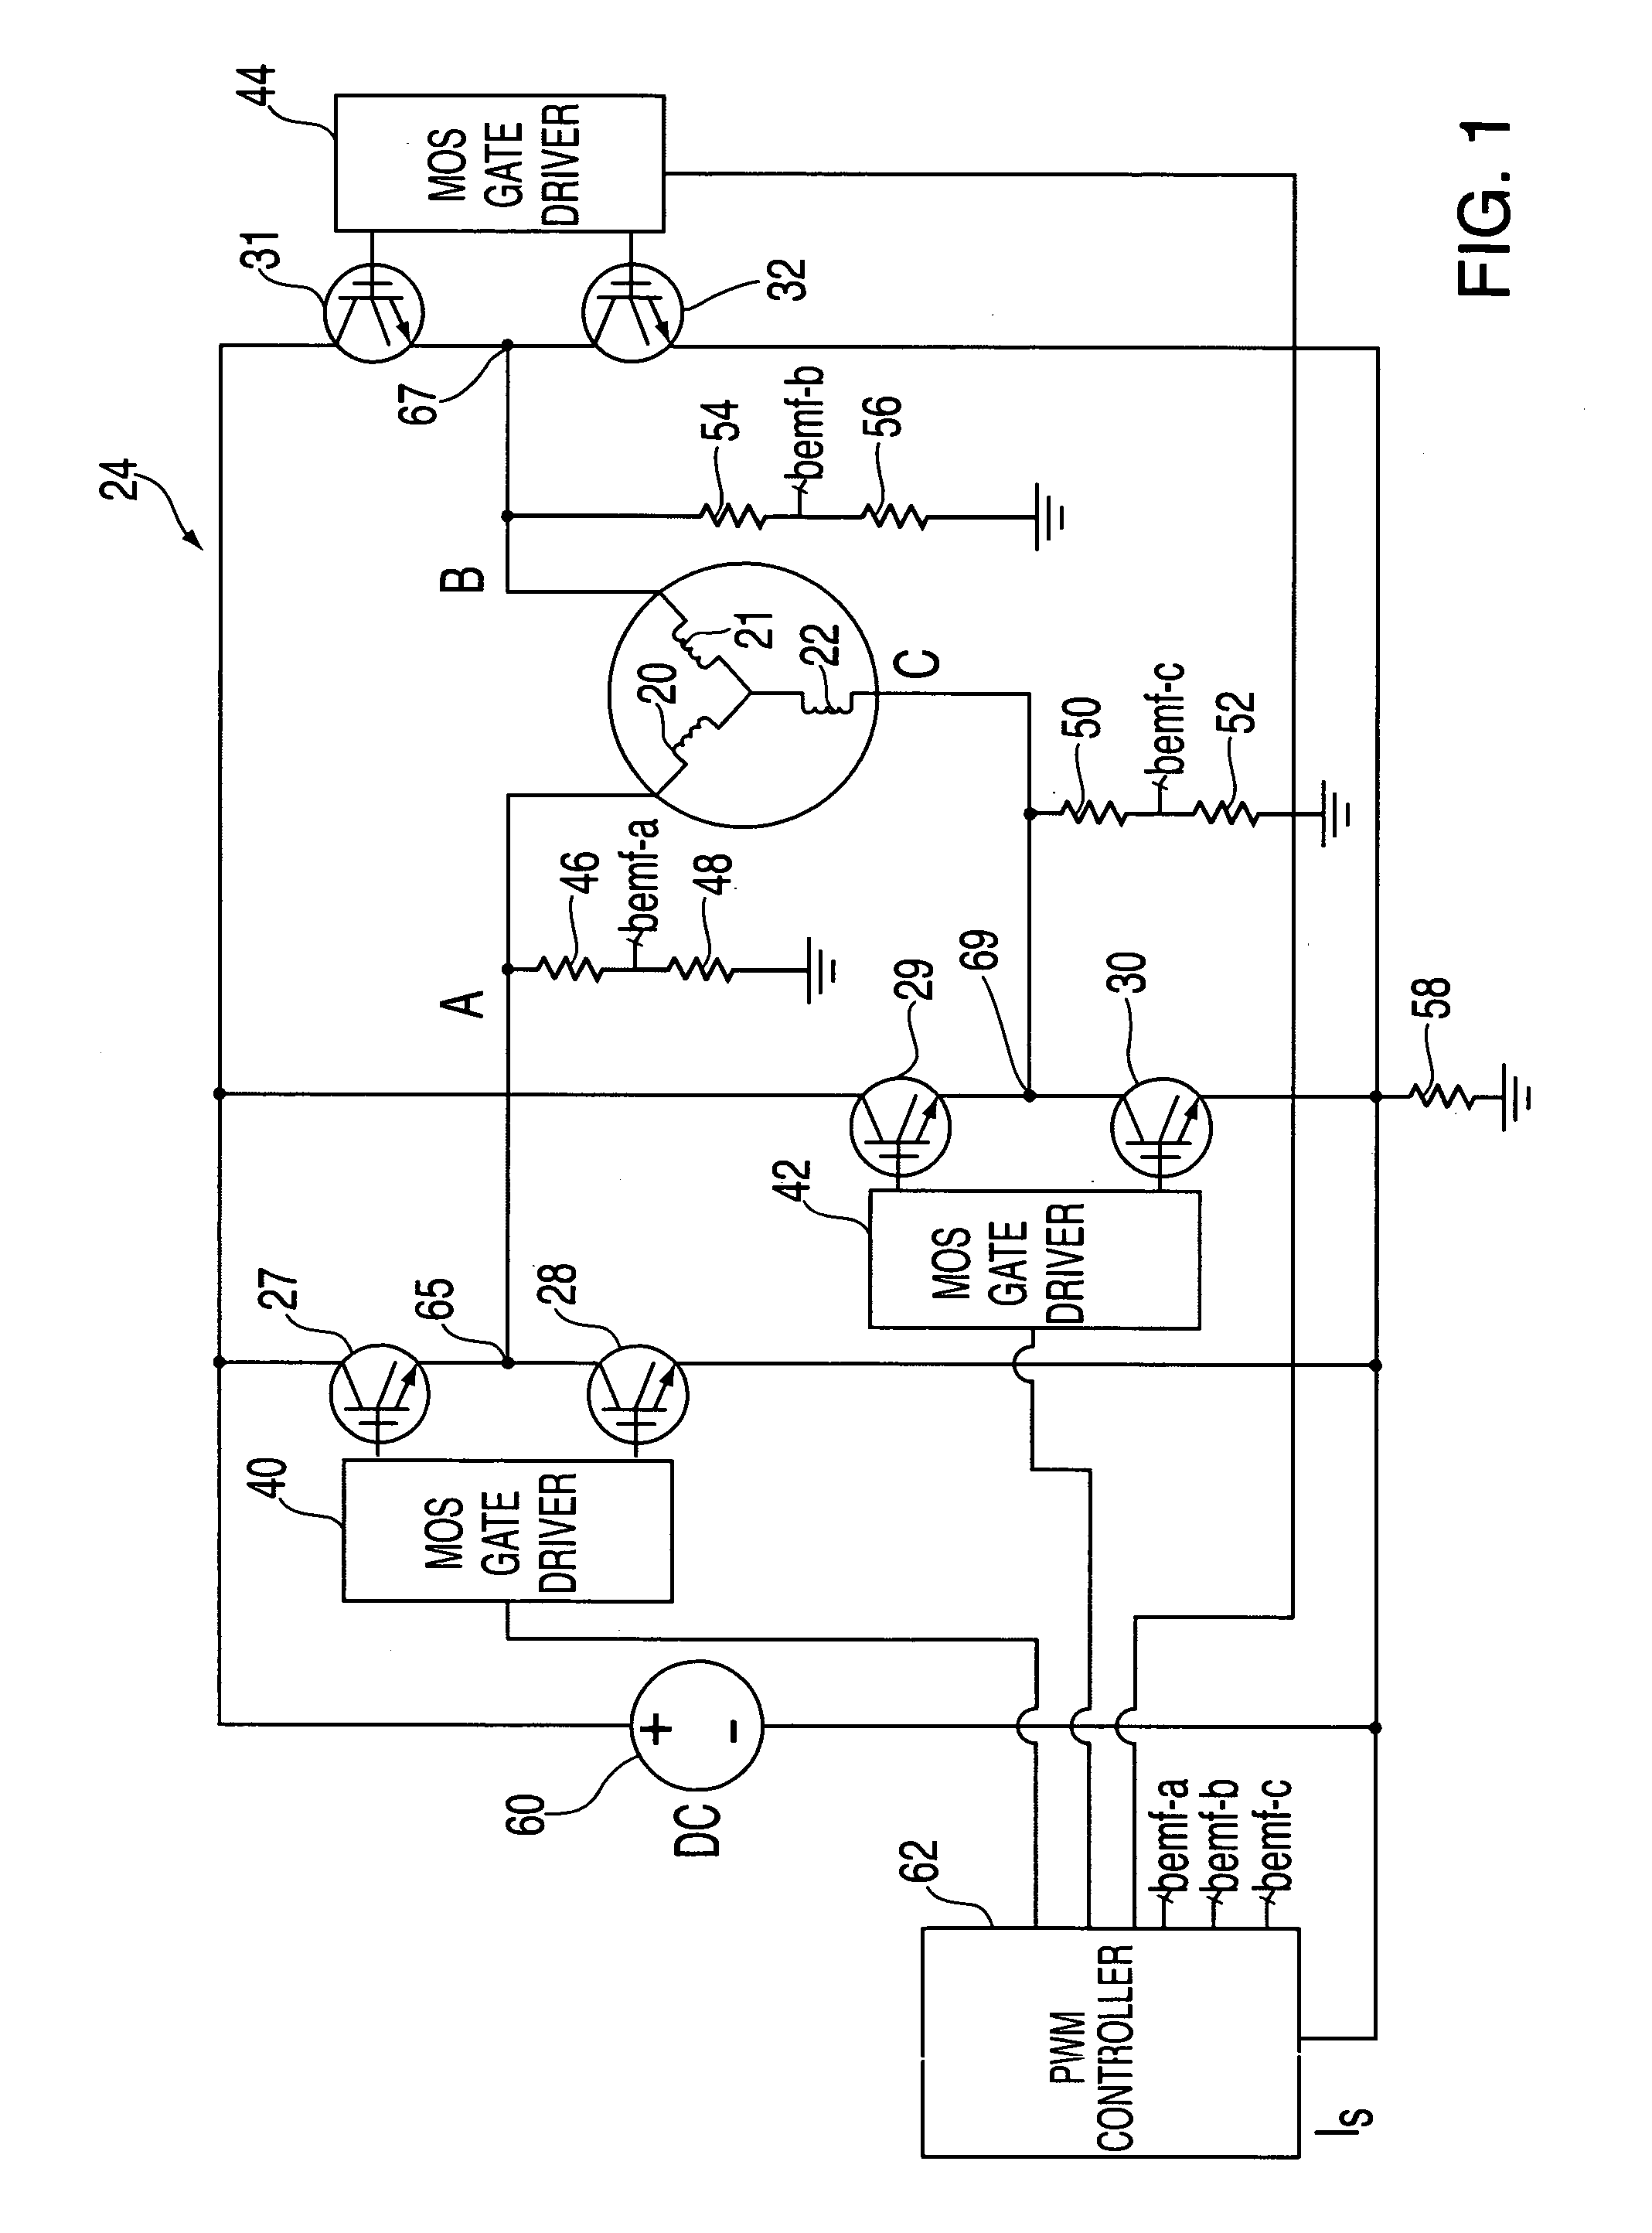 System, method, and an article of manufacture for starting a brushless direct current motor